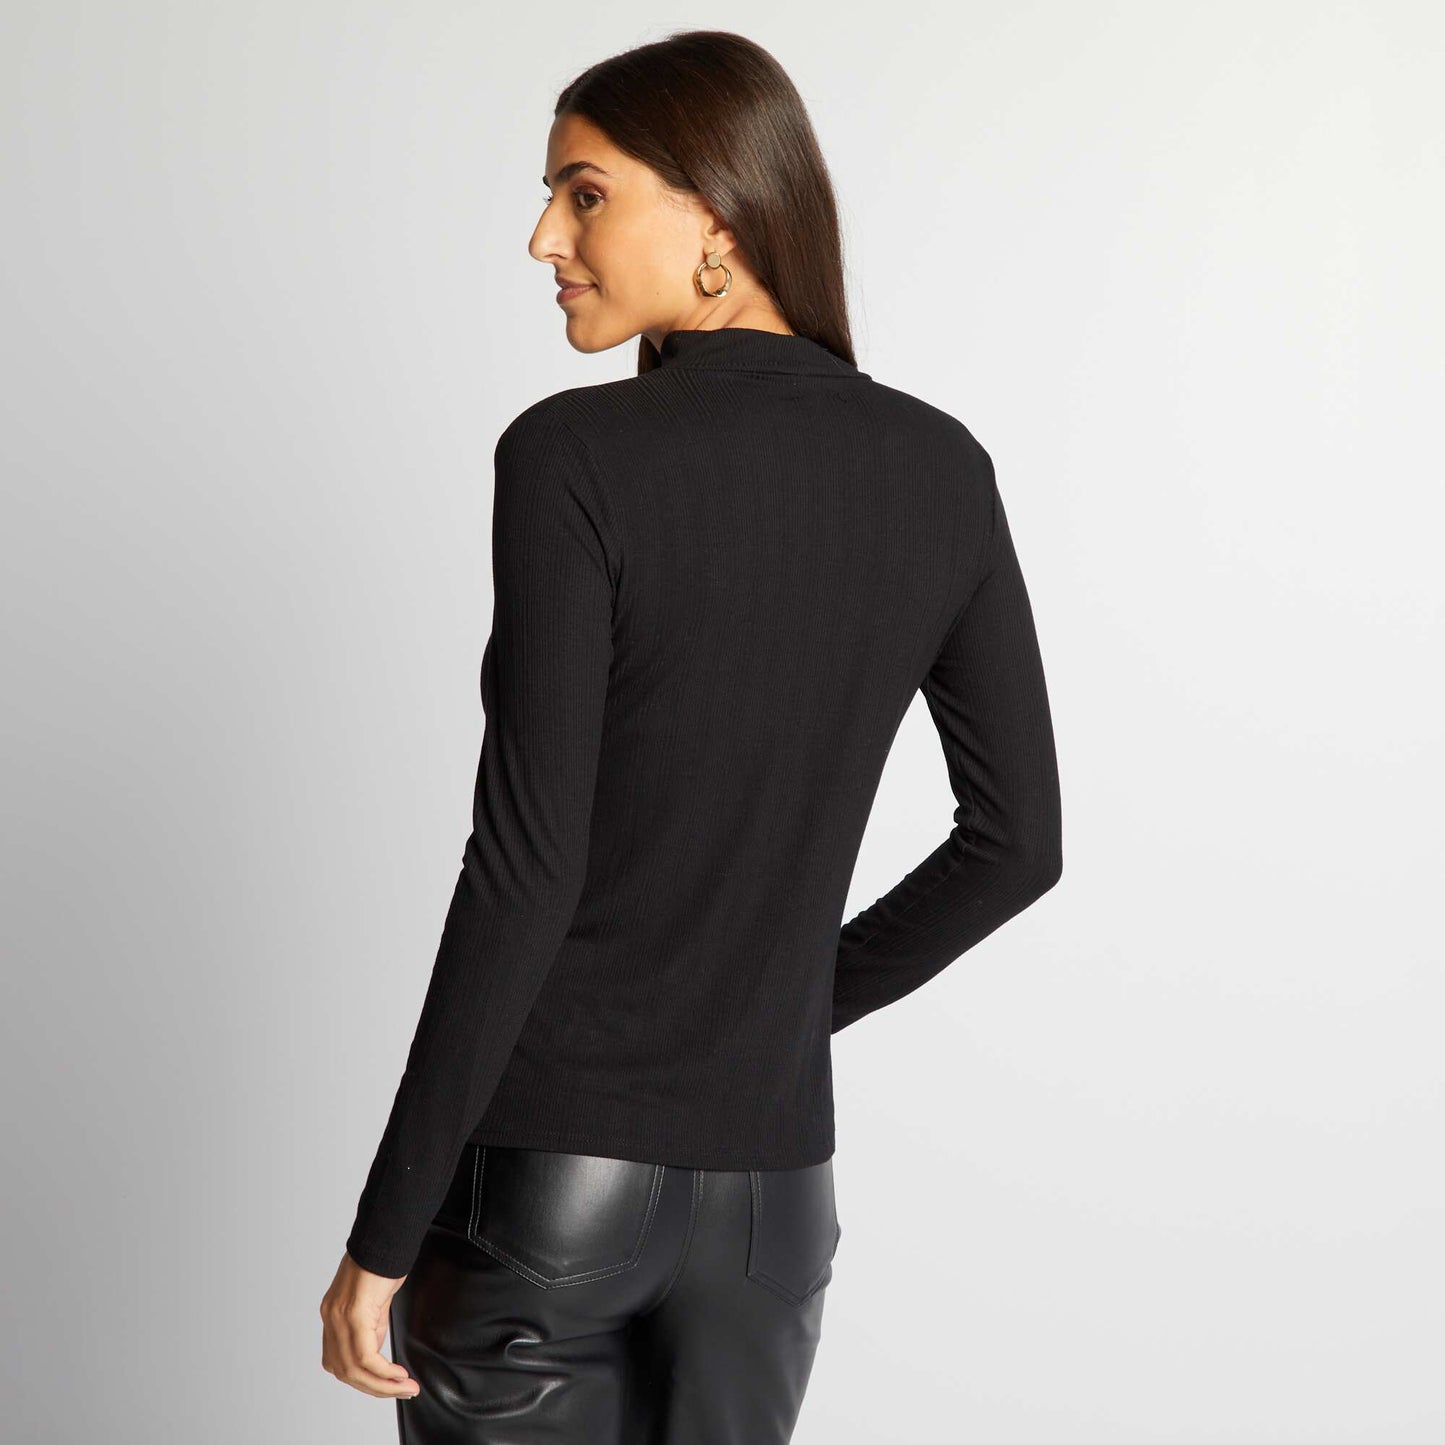 Ribbed knit undersweater black